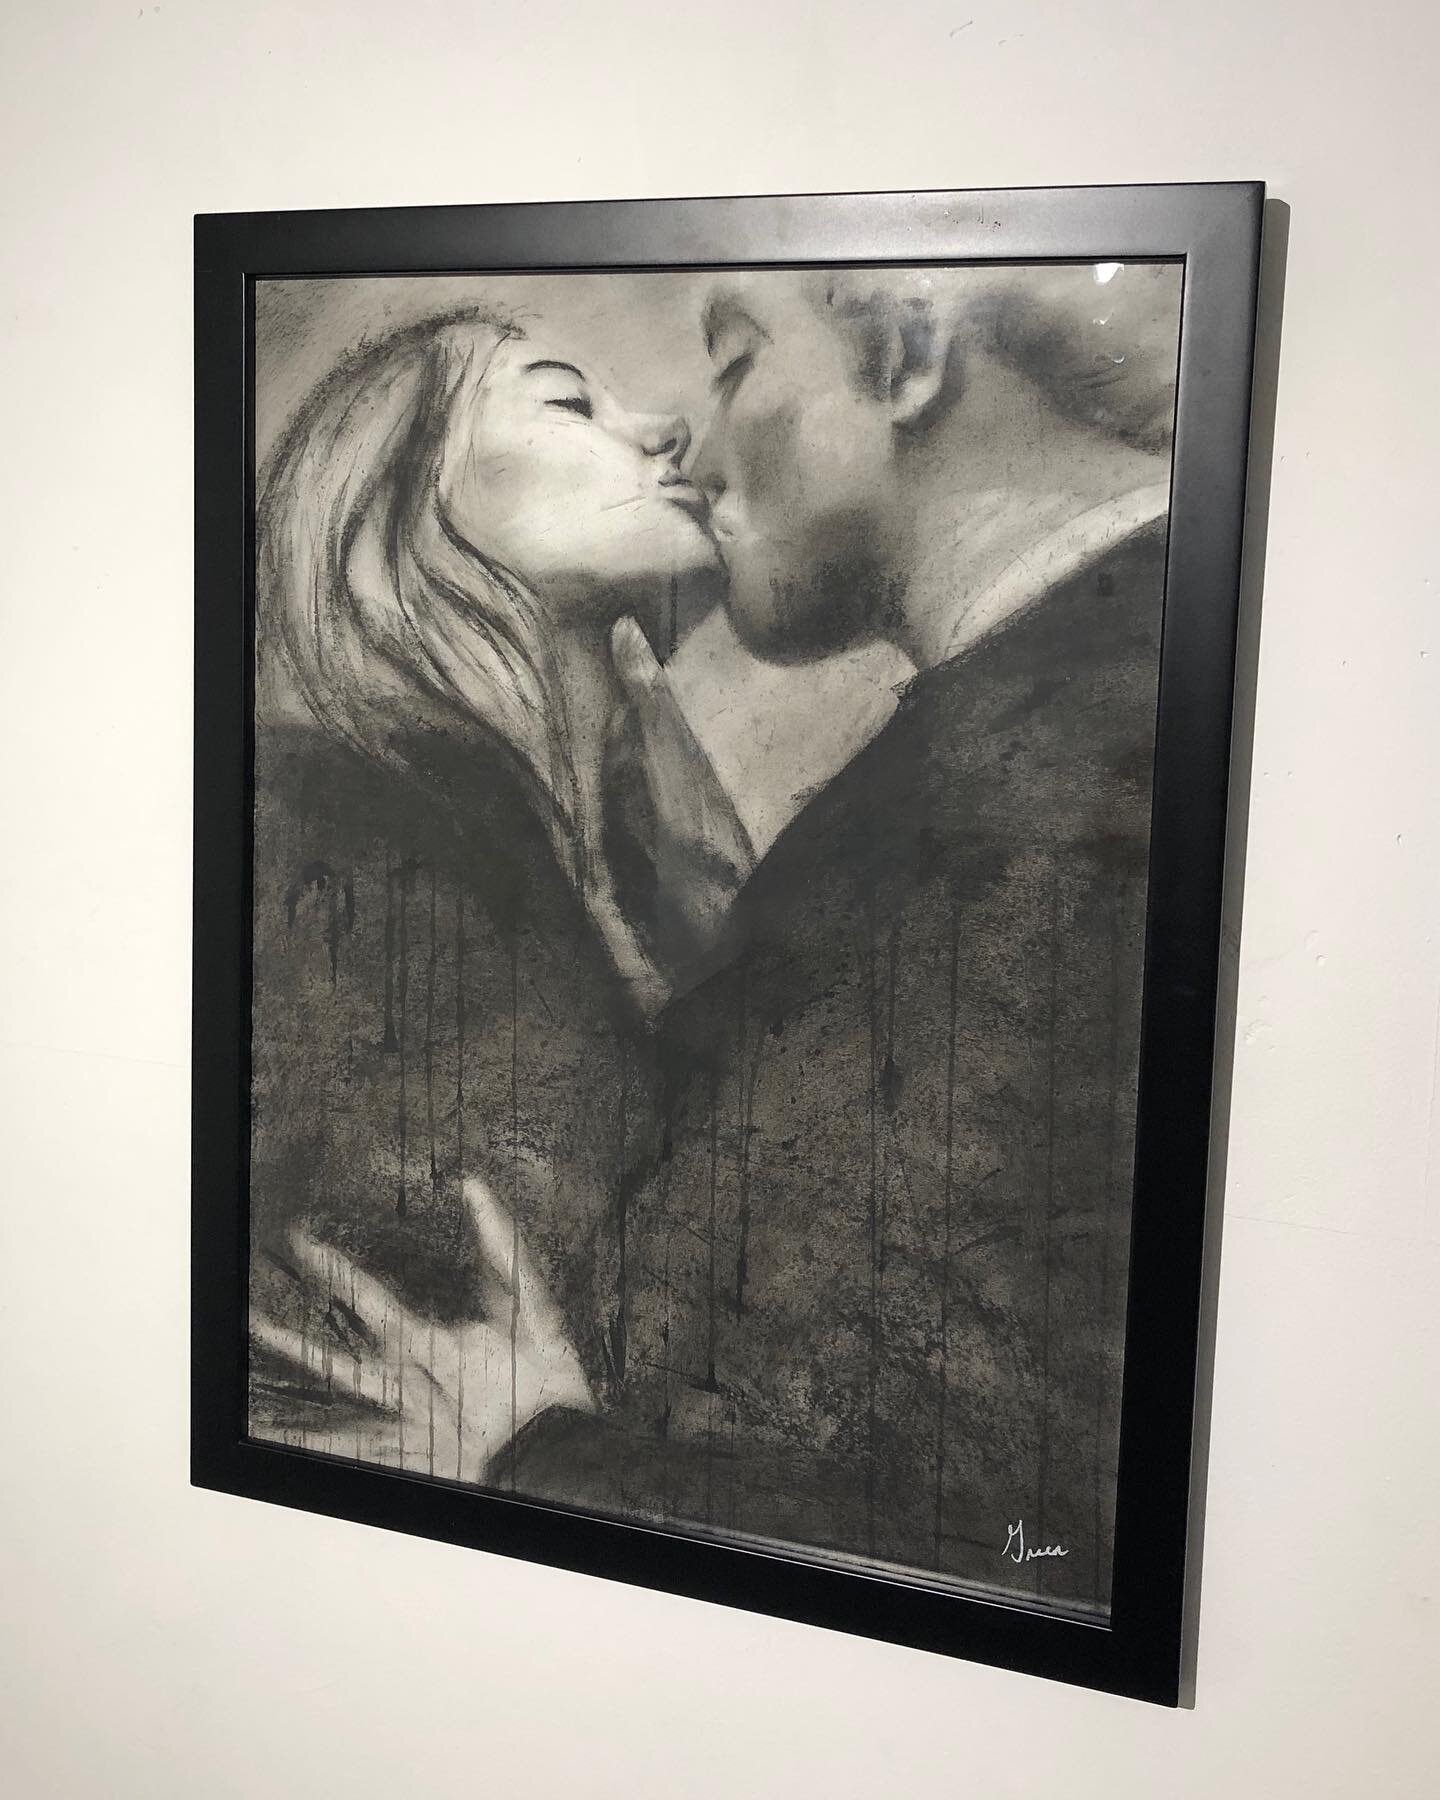 SOLD
Untitled (Kissing in the Rain) Charcoal on Paper, 18x24&rdquo; @theorem_gallery
.
#art #artwork #artist #charcoal #portrait #charcoaldrawing #portraitdrawing #drawing #charcoalonpaper #figurativeartist #contemporaryart #kc #kcmo #kansascity #kcc